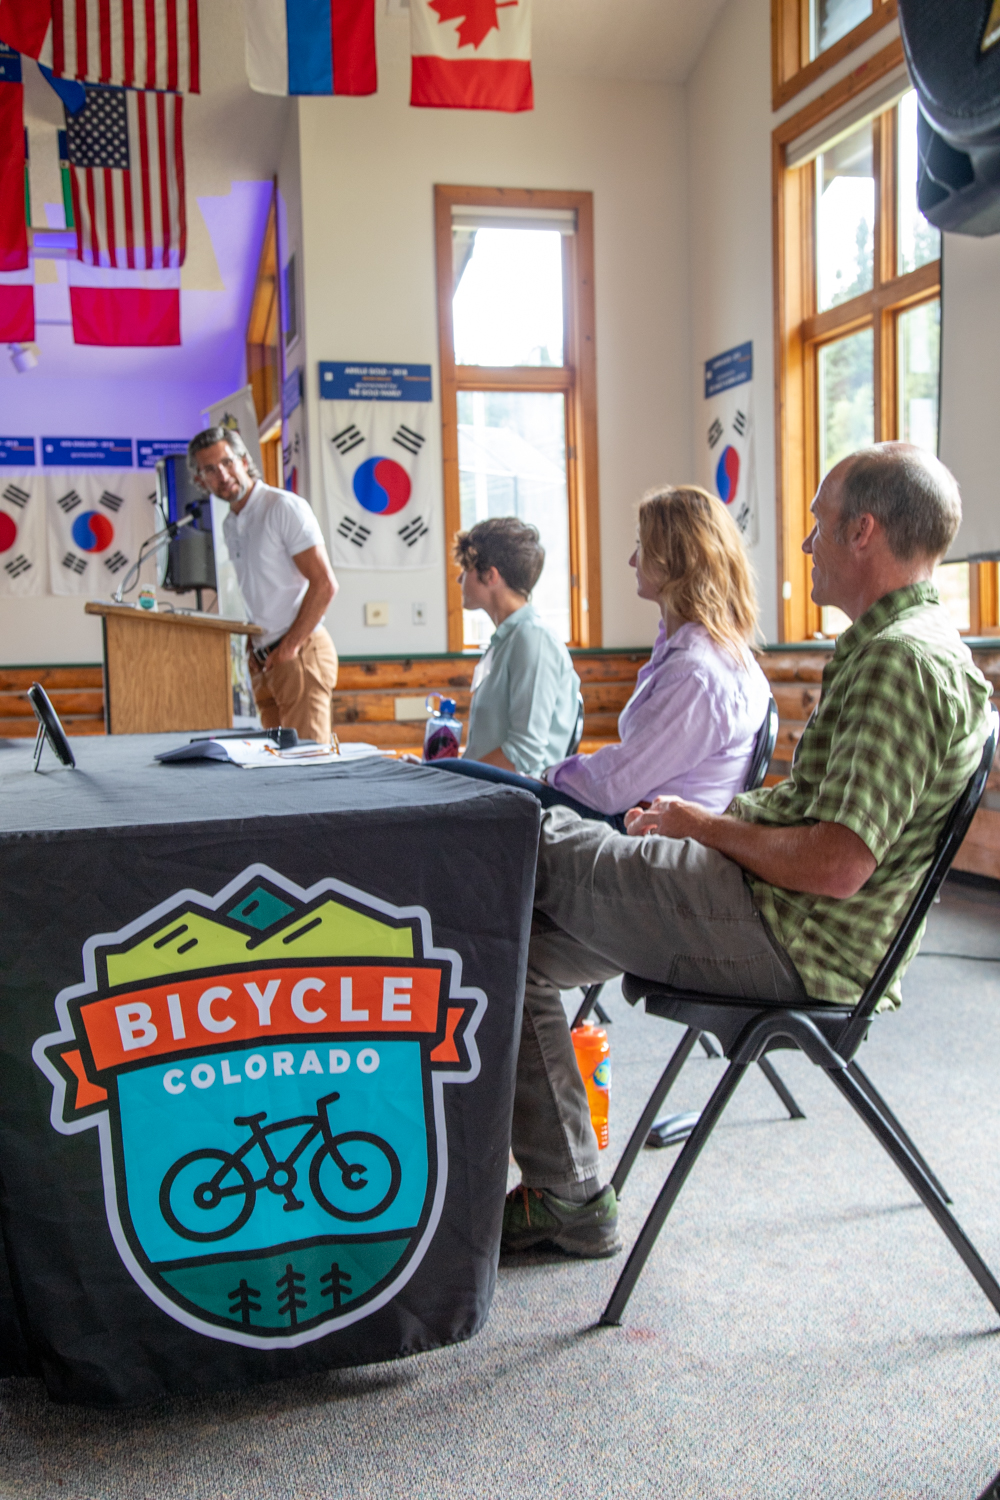 Three people sitting at a table with a cloth with the Bicycle Colorado logo on it looking over at a man speaking at a podium. They are indoors in a high ceilinged space with flags hanging from the ceiling.